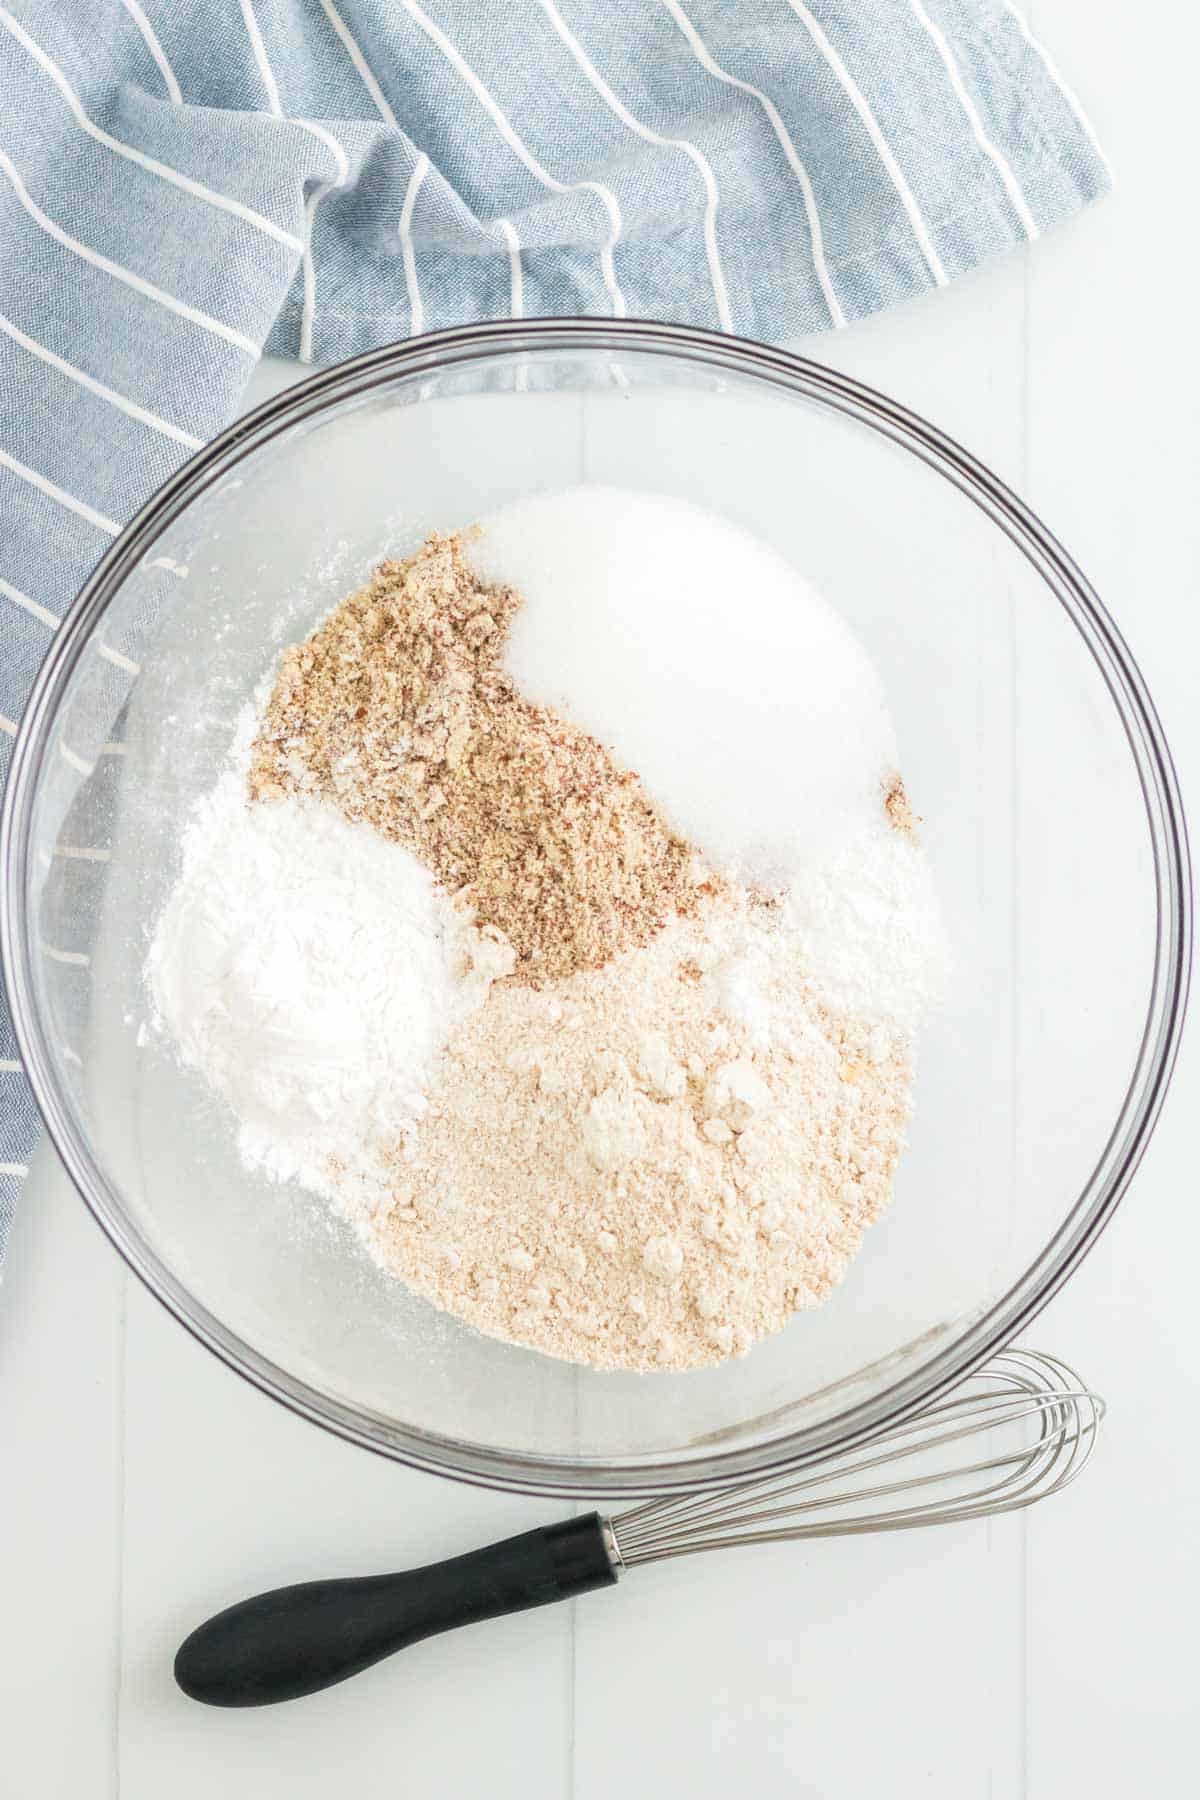 Oat flour, tapioca starch, sugar and the remaining dry ingredients inside of a mixing bowl next to a small whisk